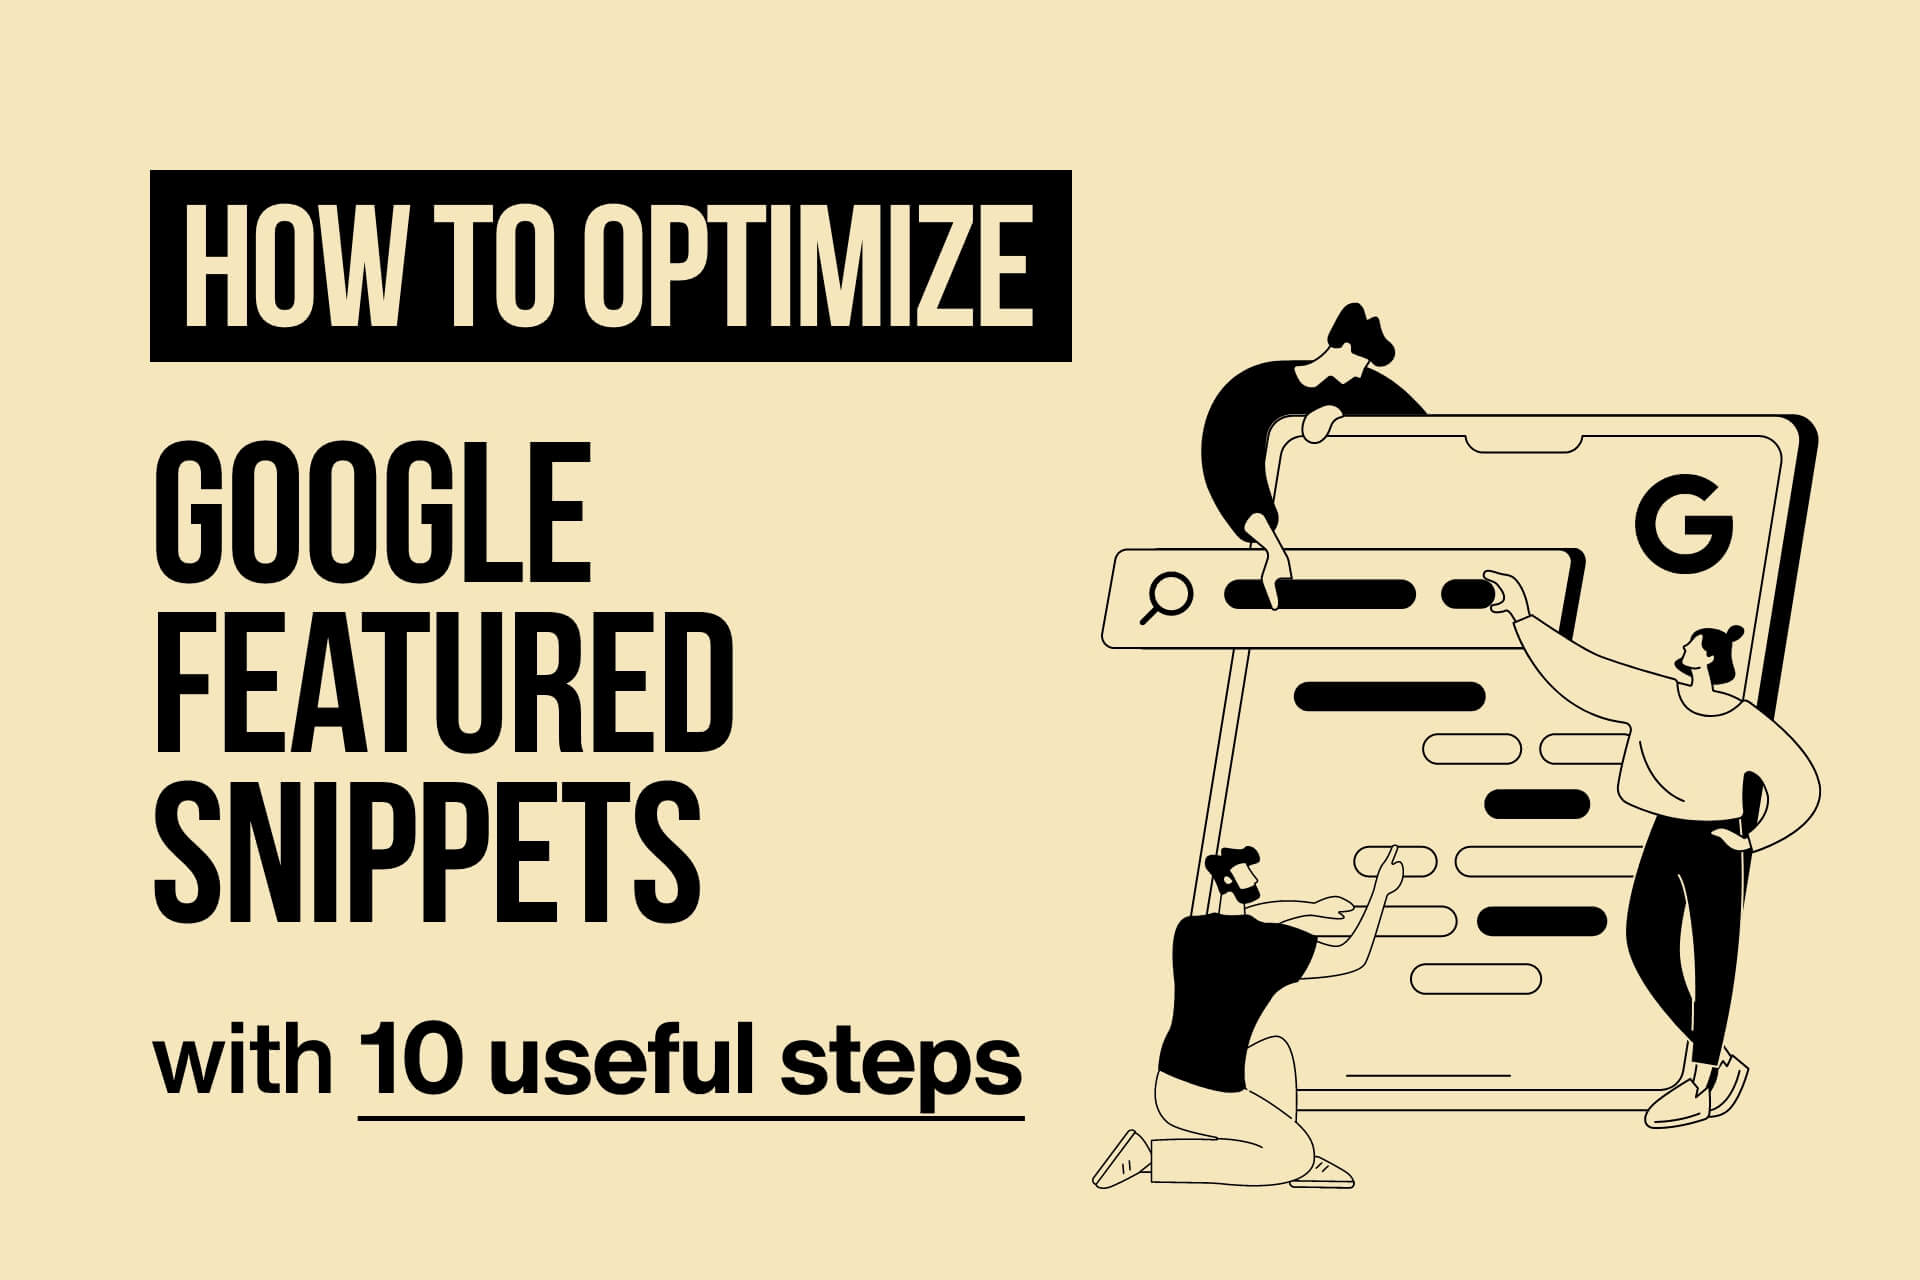 how to optimize google featured snippets with 10 useful steps a man pointing out different google snippets and google logo